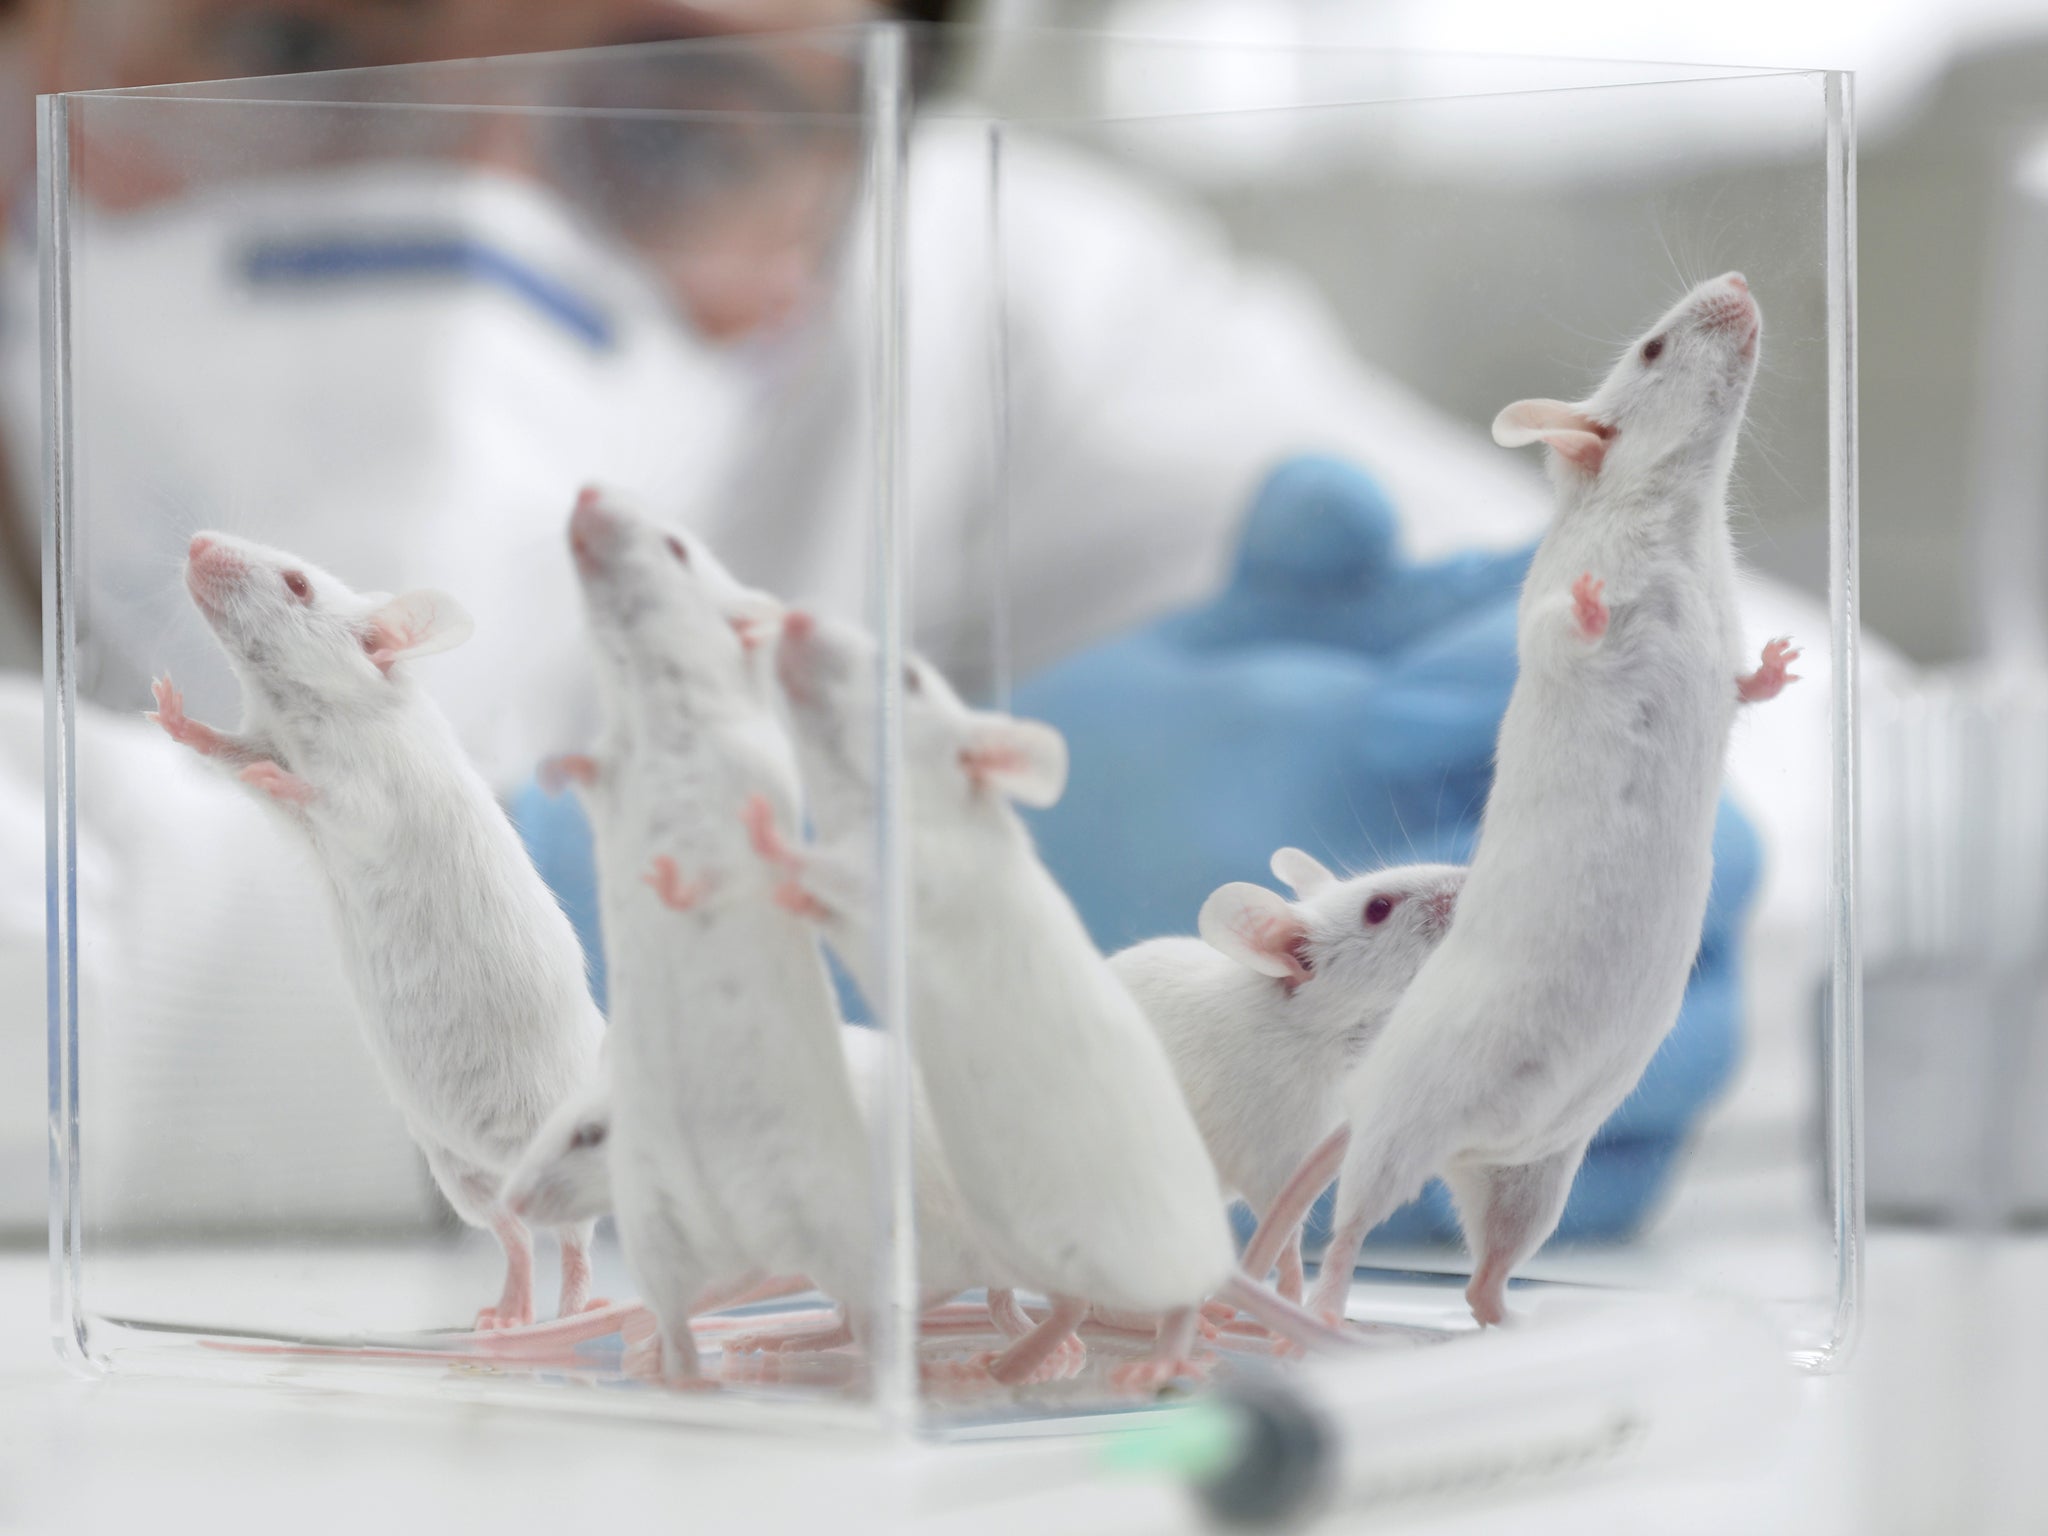 Researchers were able to perform gene therapy on living mice